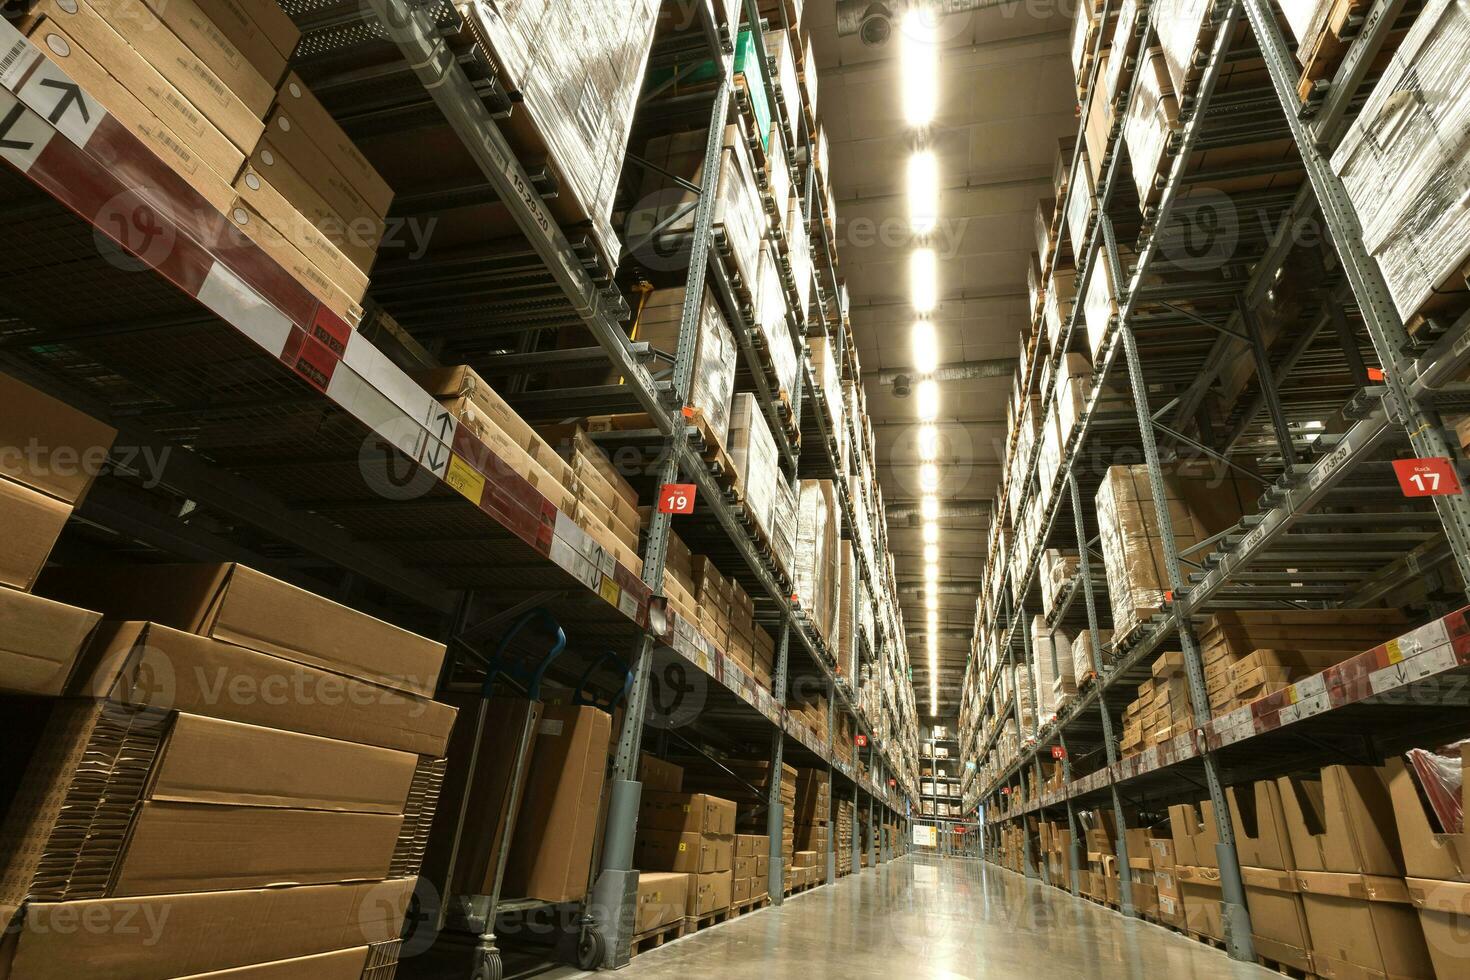 A large warehouse of furniture department stores. A warehouse where goods are stacked in record steel frames for replenishing stock of products sold to customers. photo